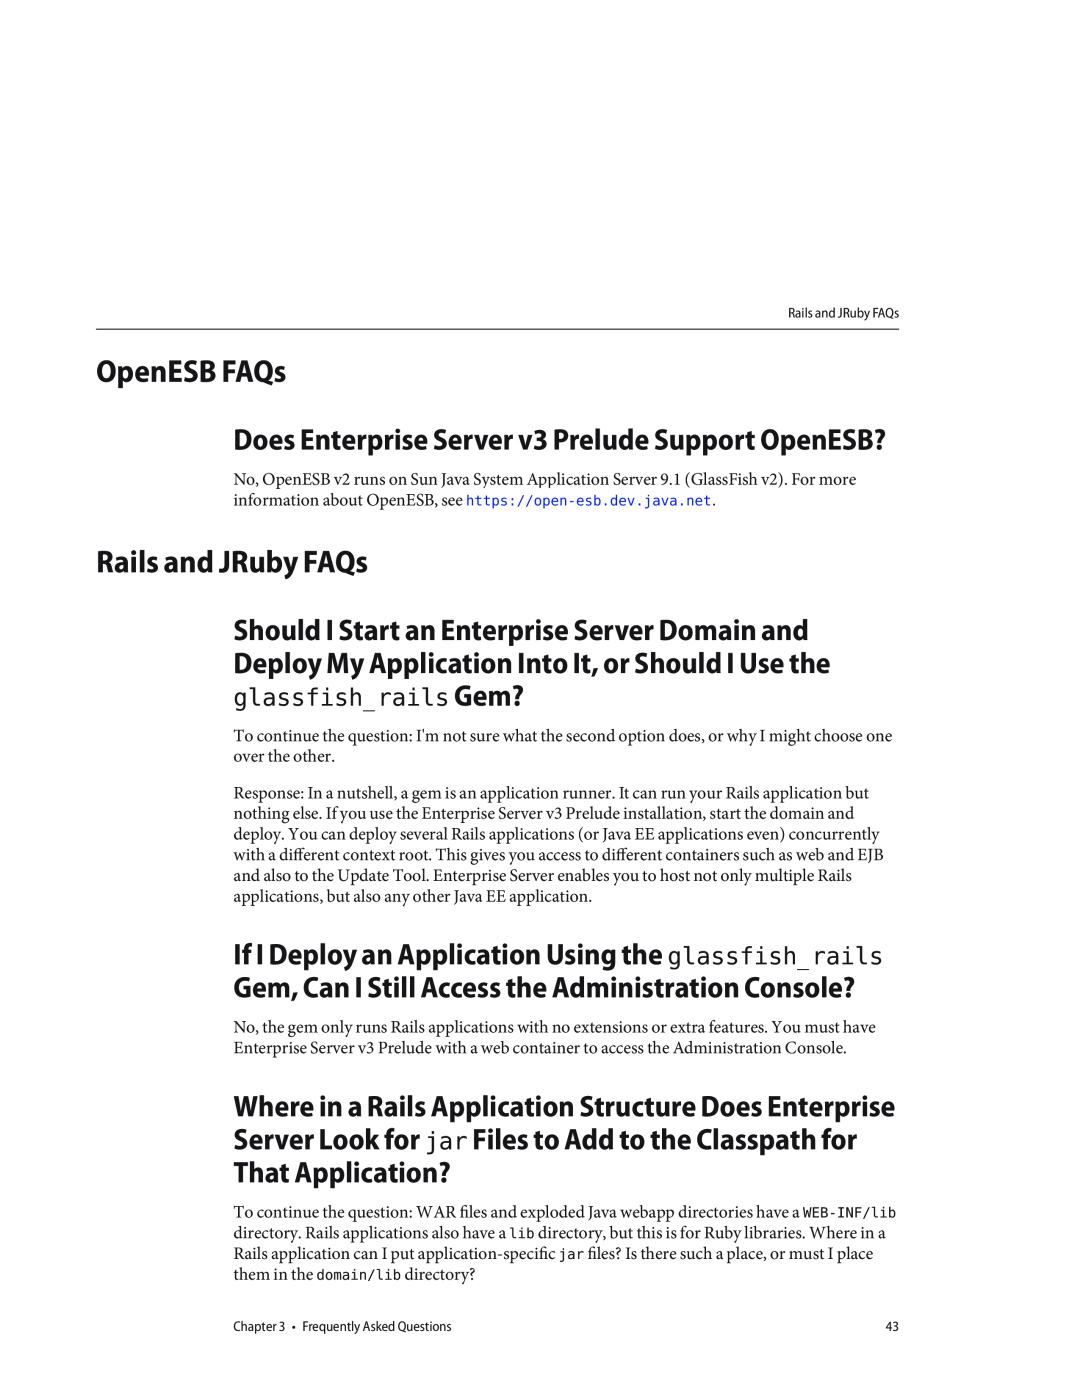 Sun Microsystems 820682310 manual OpenESB FAQs, Rails and JRuby FAQs, If I Deploy an Application Using the glassfishrails 